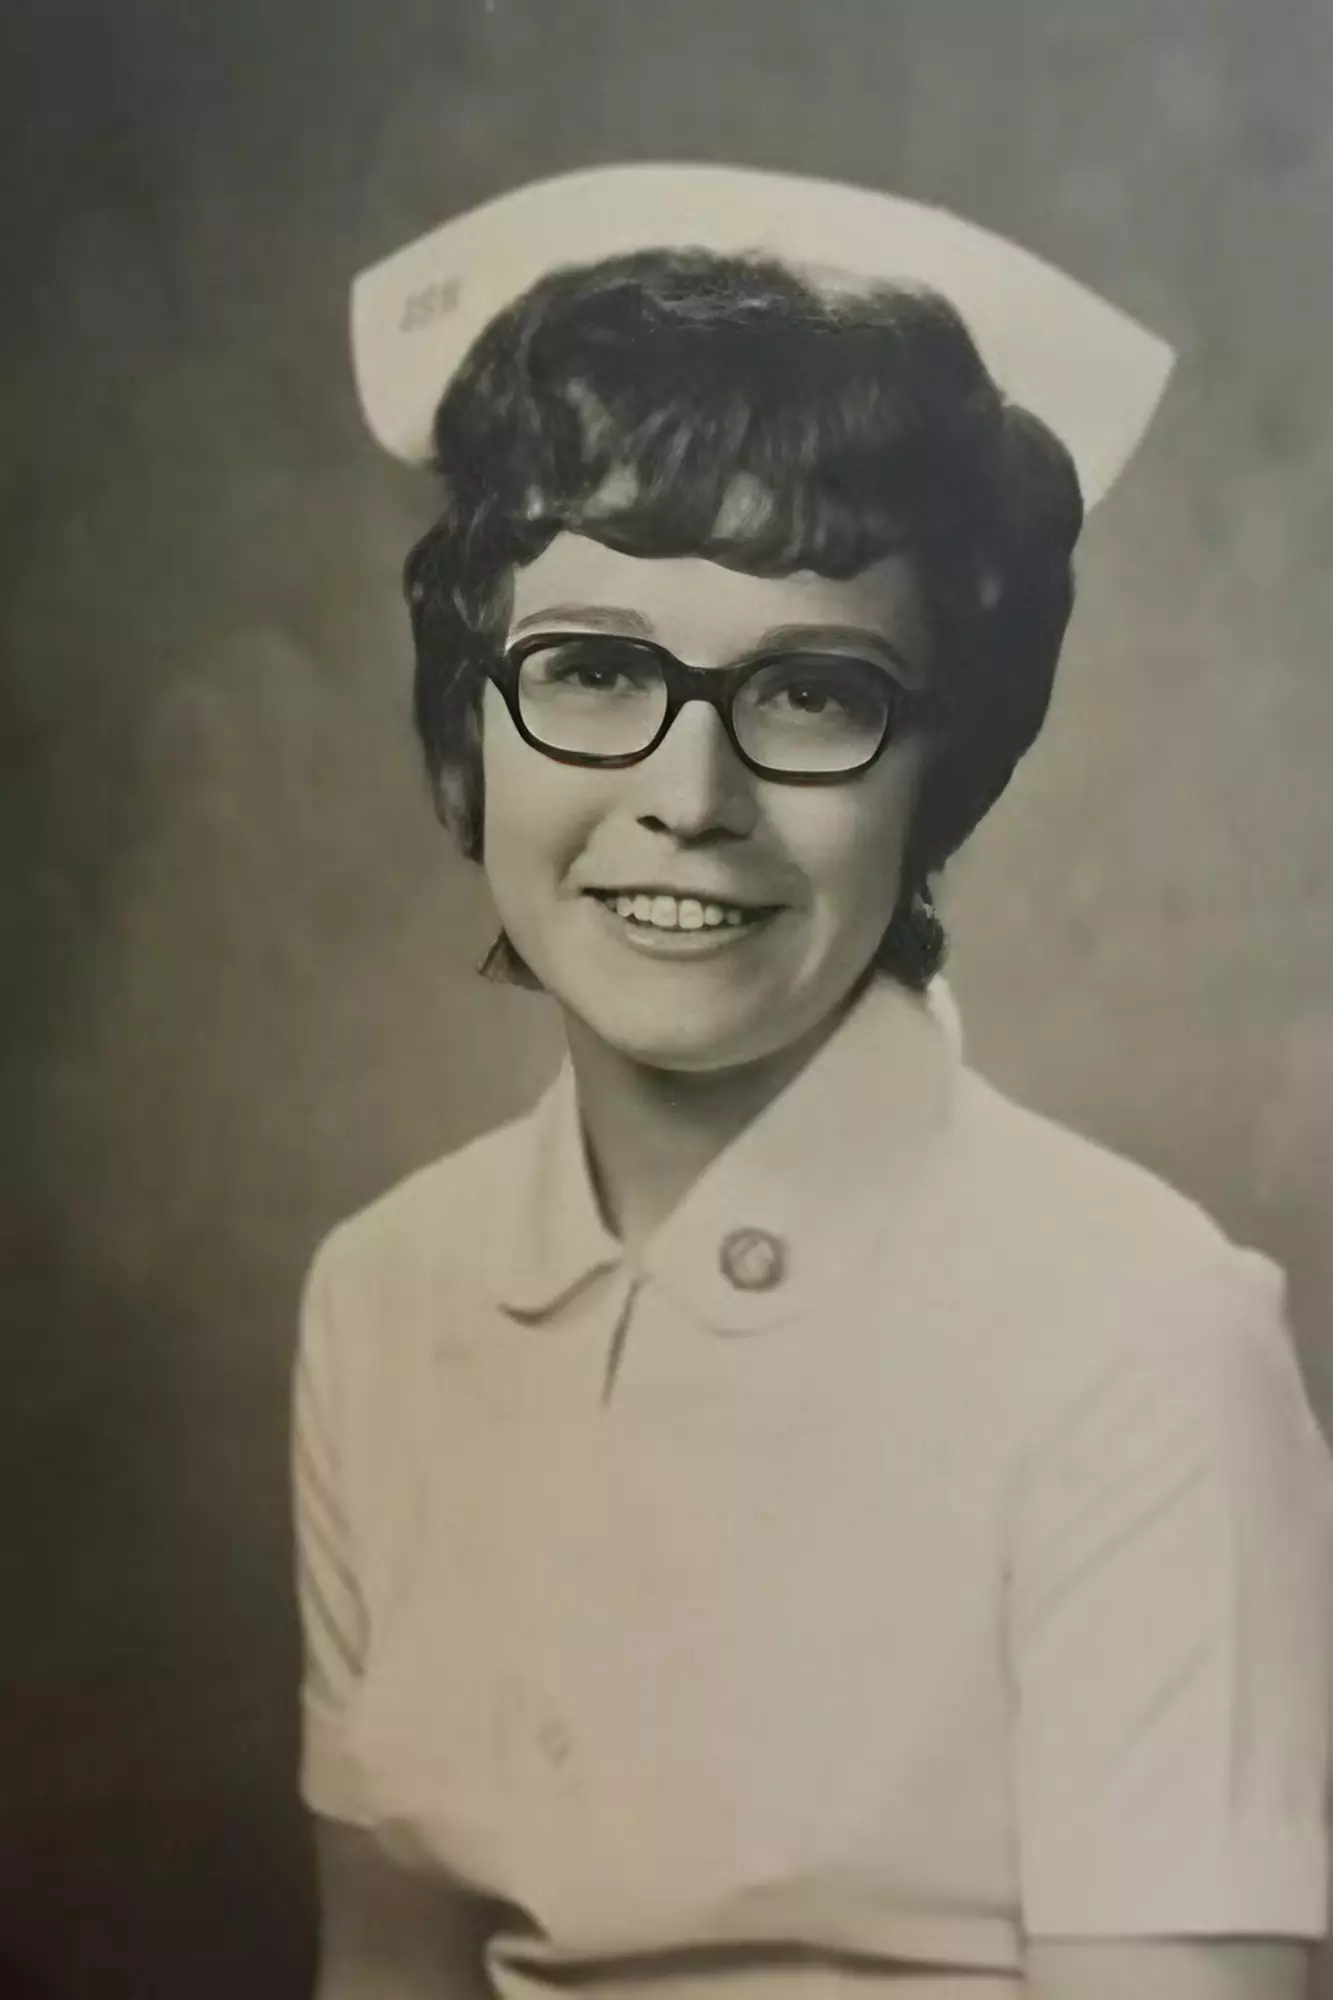 Dr. Orman's mother, Debra, spent her career as a nurse and influenced her to pursue medicine.